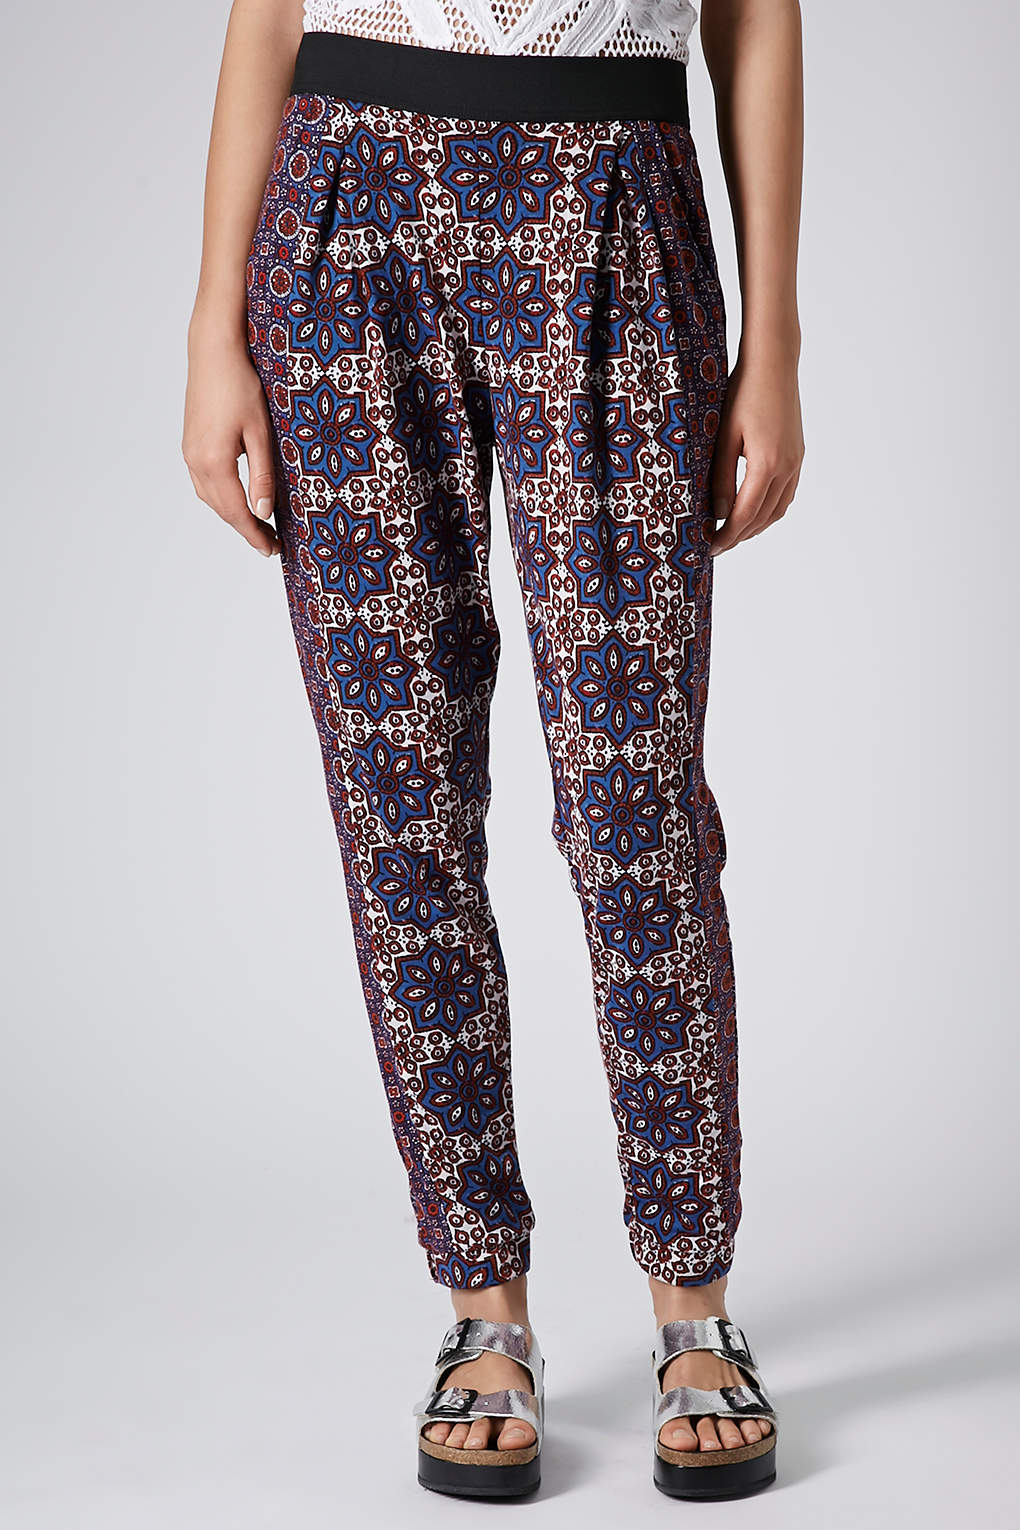 Lyst - Topshop Mixed Tile Print Jersey Tapered Trousers in Purple